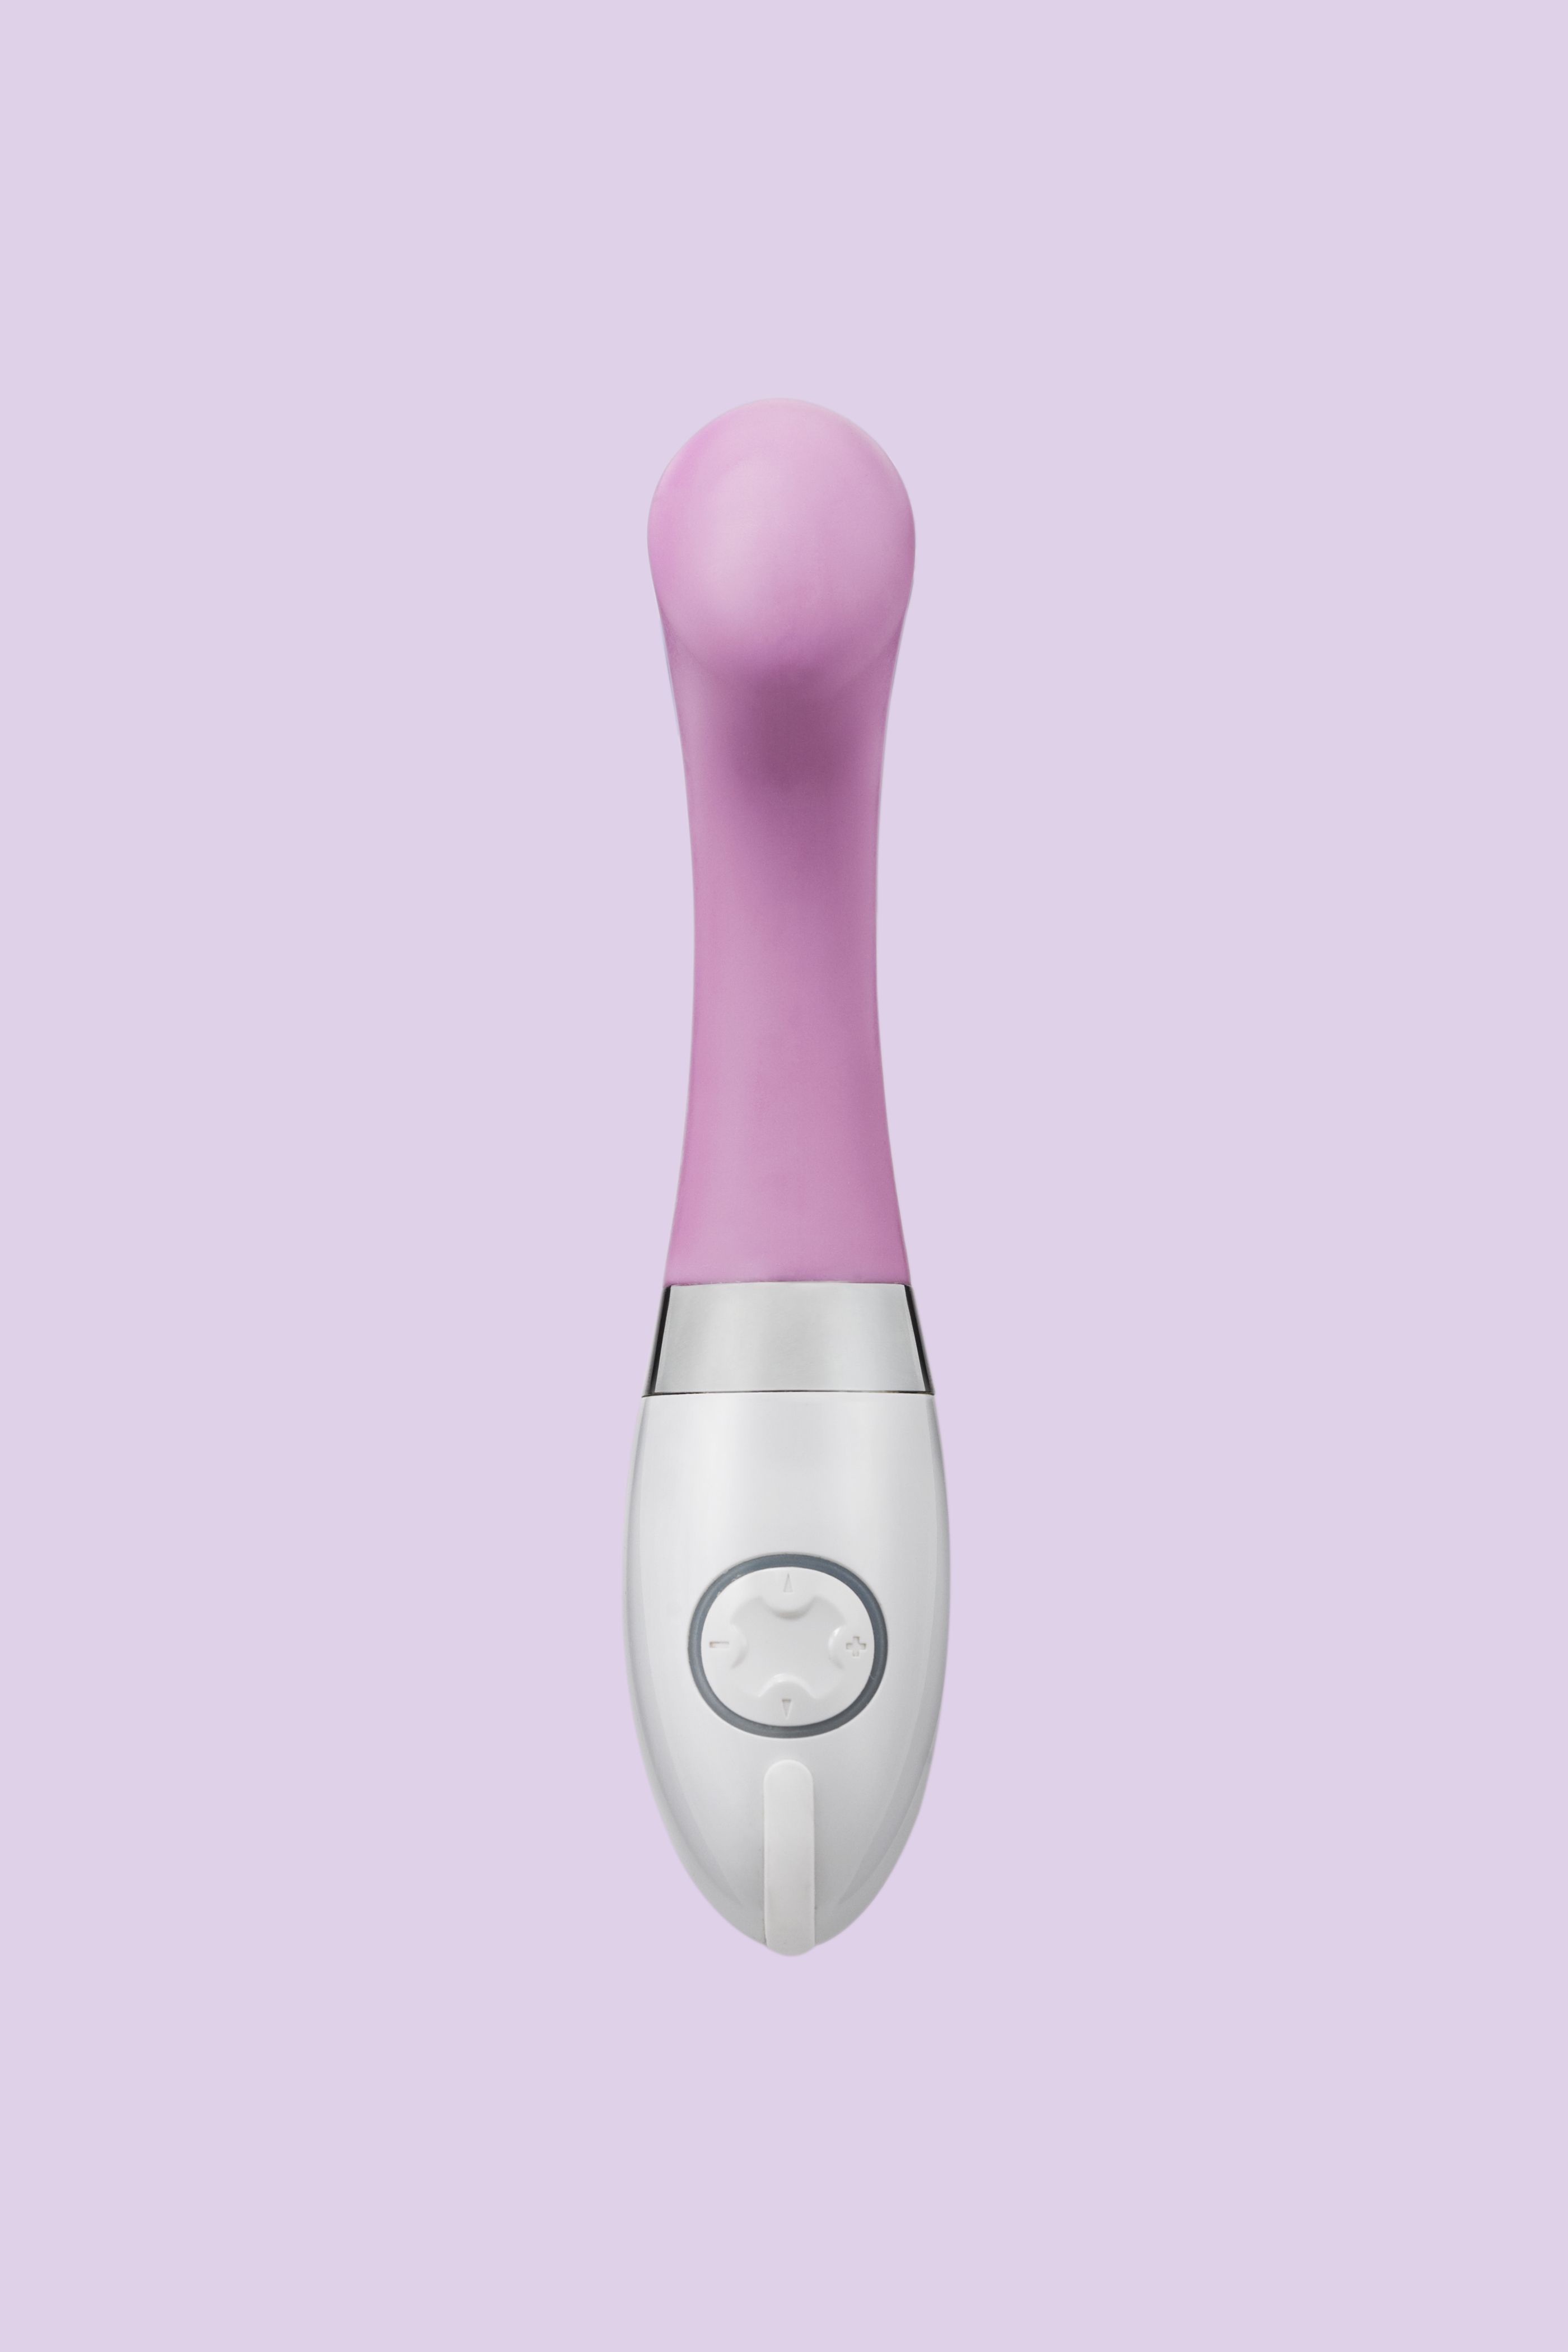 Sexplain It My Girlfriend Likes Her Vibrator Better Than picture picture